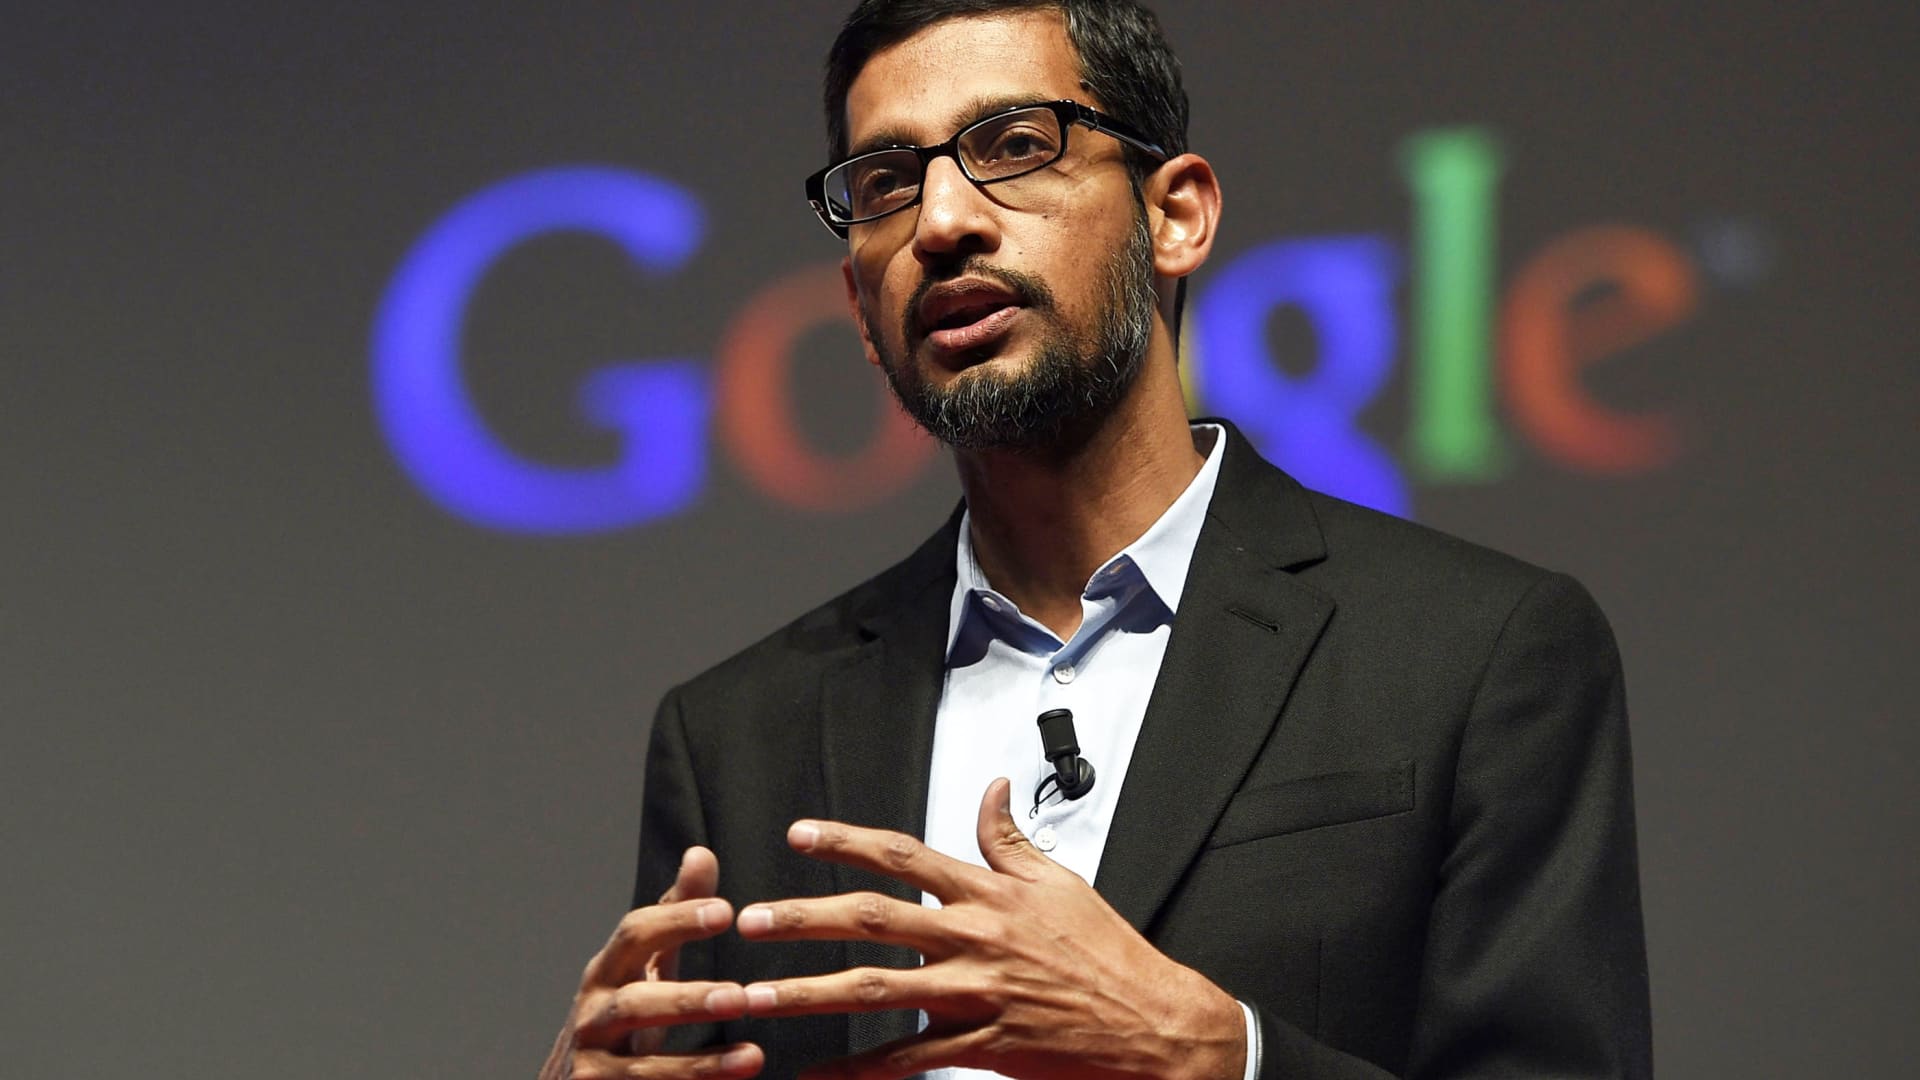 Google CEO defends job cuts in animated town hall as employees demand clarity on process